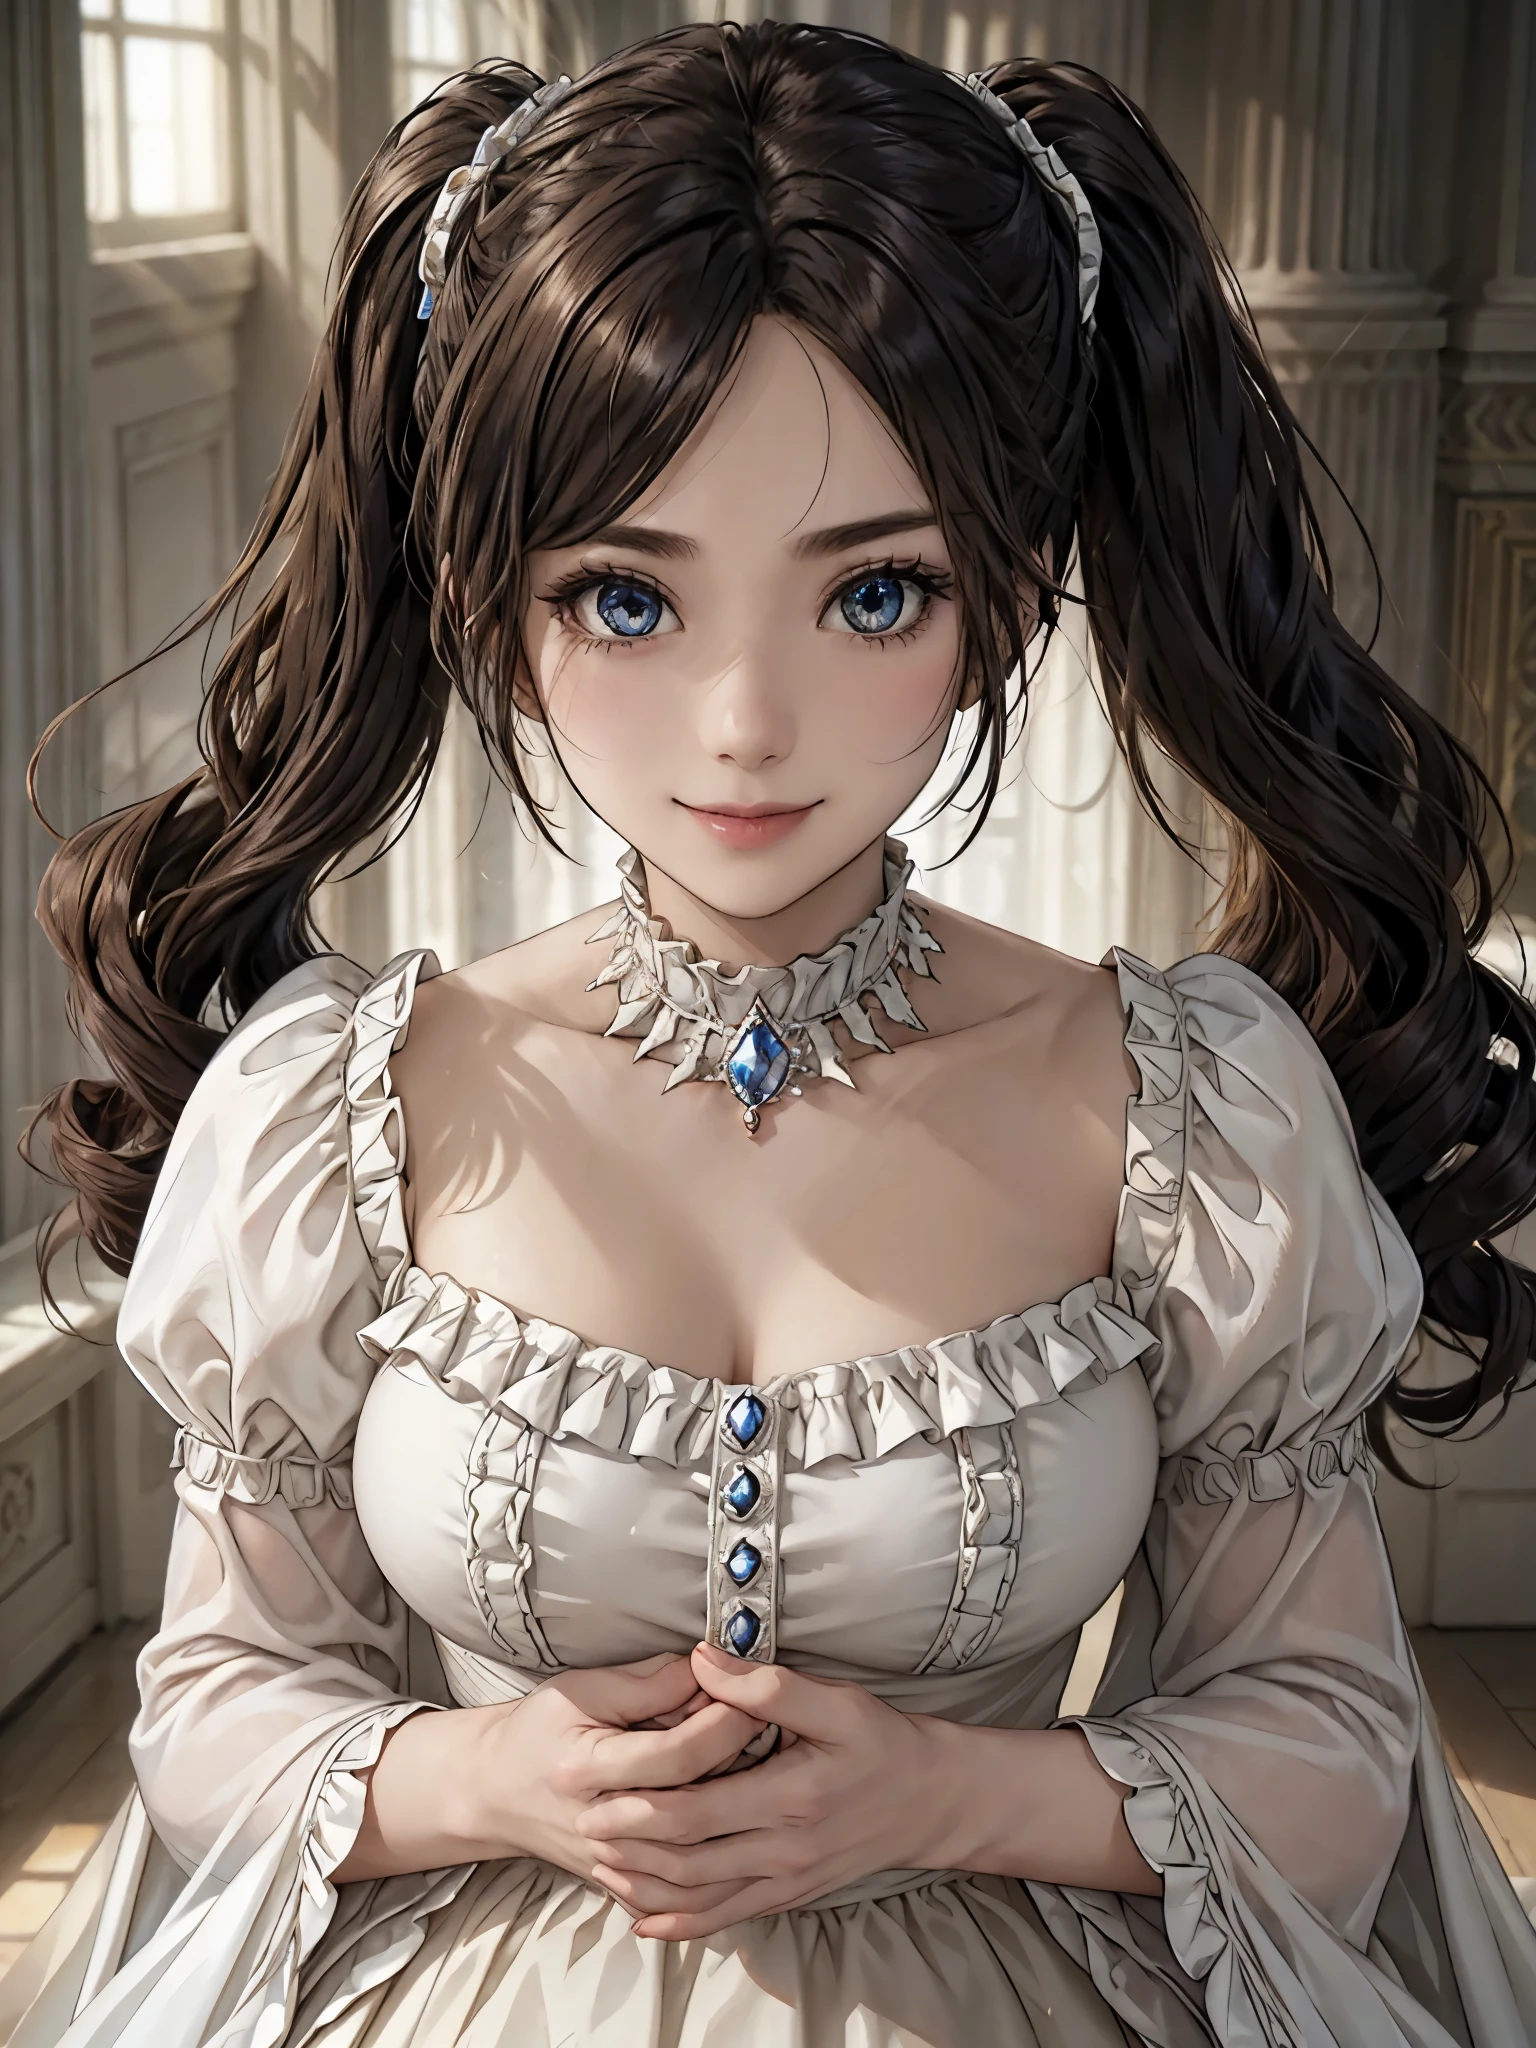 ((1 girl)), dramatic composition, court style dress up, royal, nice, カスケードfrills, frills, bow, crystal chandelier, Detailed round facial features,roman style curly hairstyle, to place, Ponytail like a drill, look at the camera, bangs, maximalism, palace background, Delicate depiction of hair and eyes, princess dress, nice skirts, flowers in hand, smile, starry eyes, cinematic light, extreme details, High resolution, Happy, very long hair, diamond, broken diamond, junction chip, particles of light